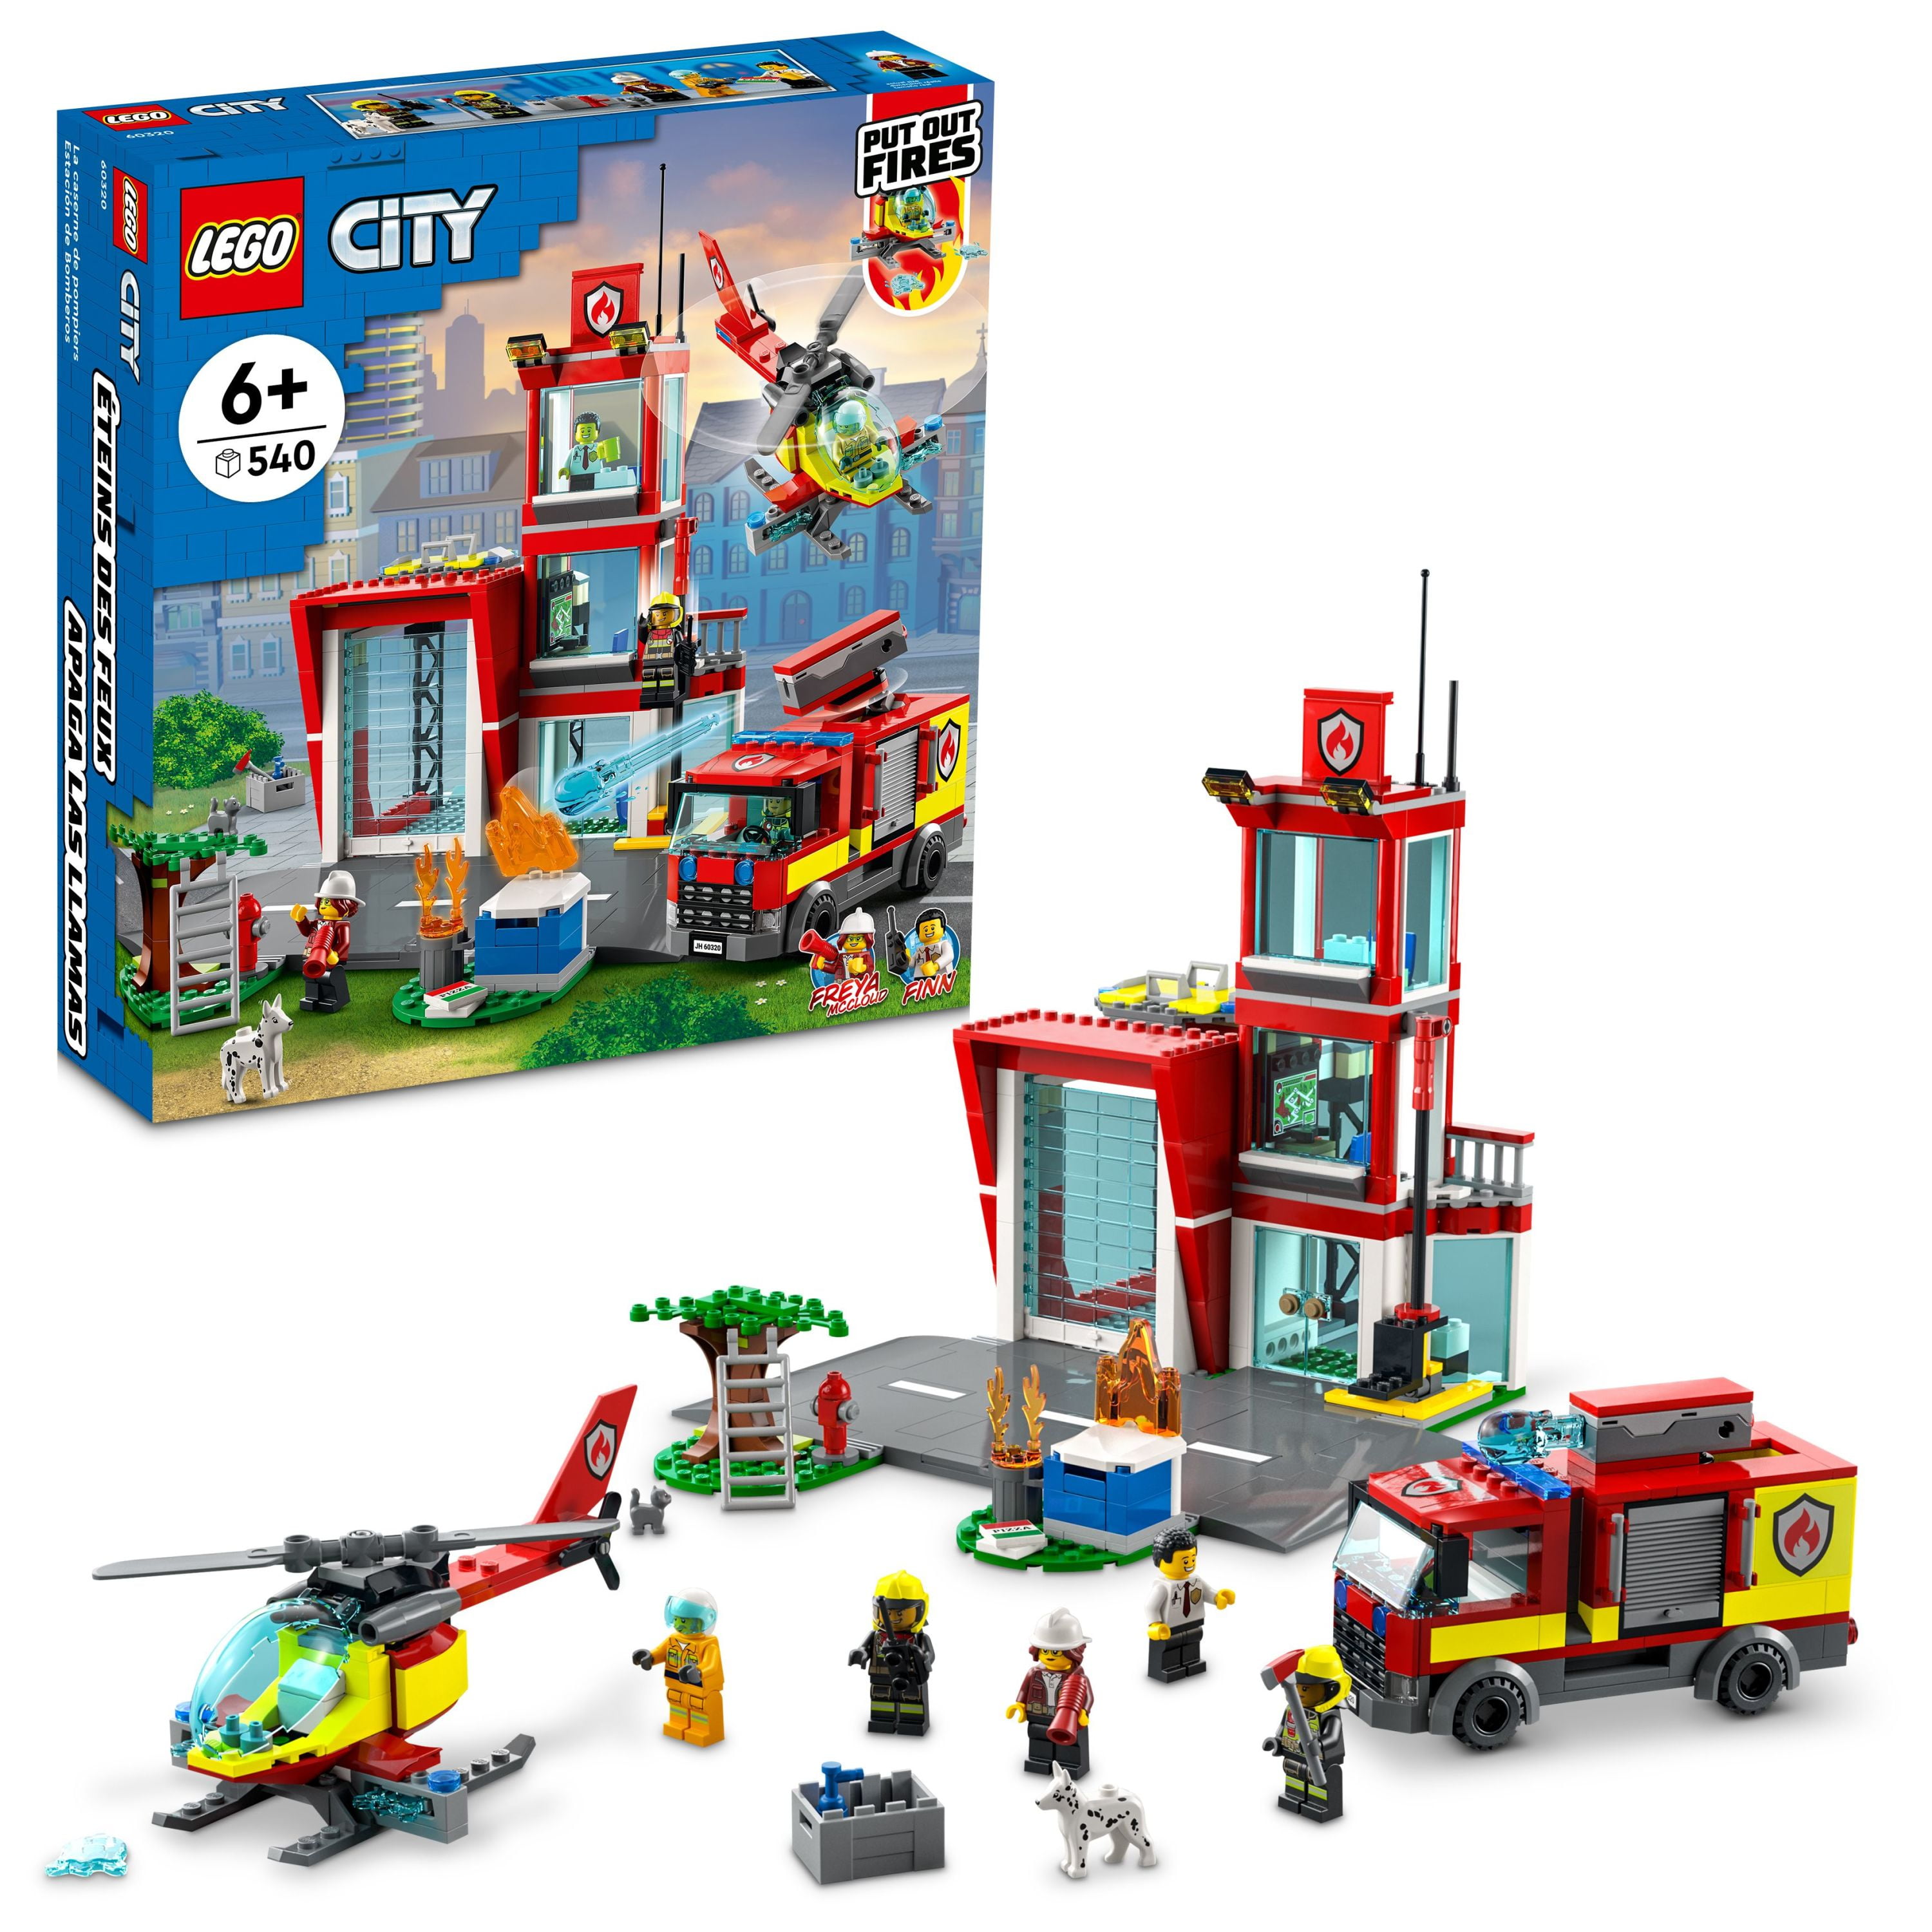 LEGO City Fire Station Set 60320 with Garage, Helicopter & Engine Toys Firefighter Minifigures, Vehicles Playset, Gifts for Kids Age 6 Plus Walmart.com